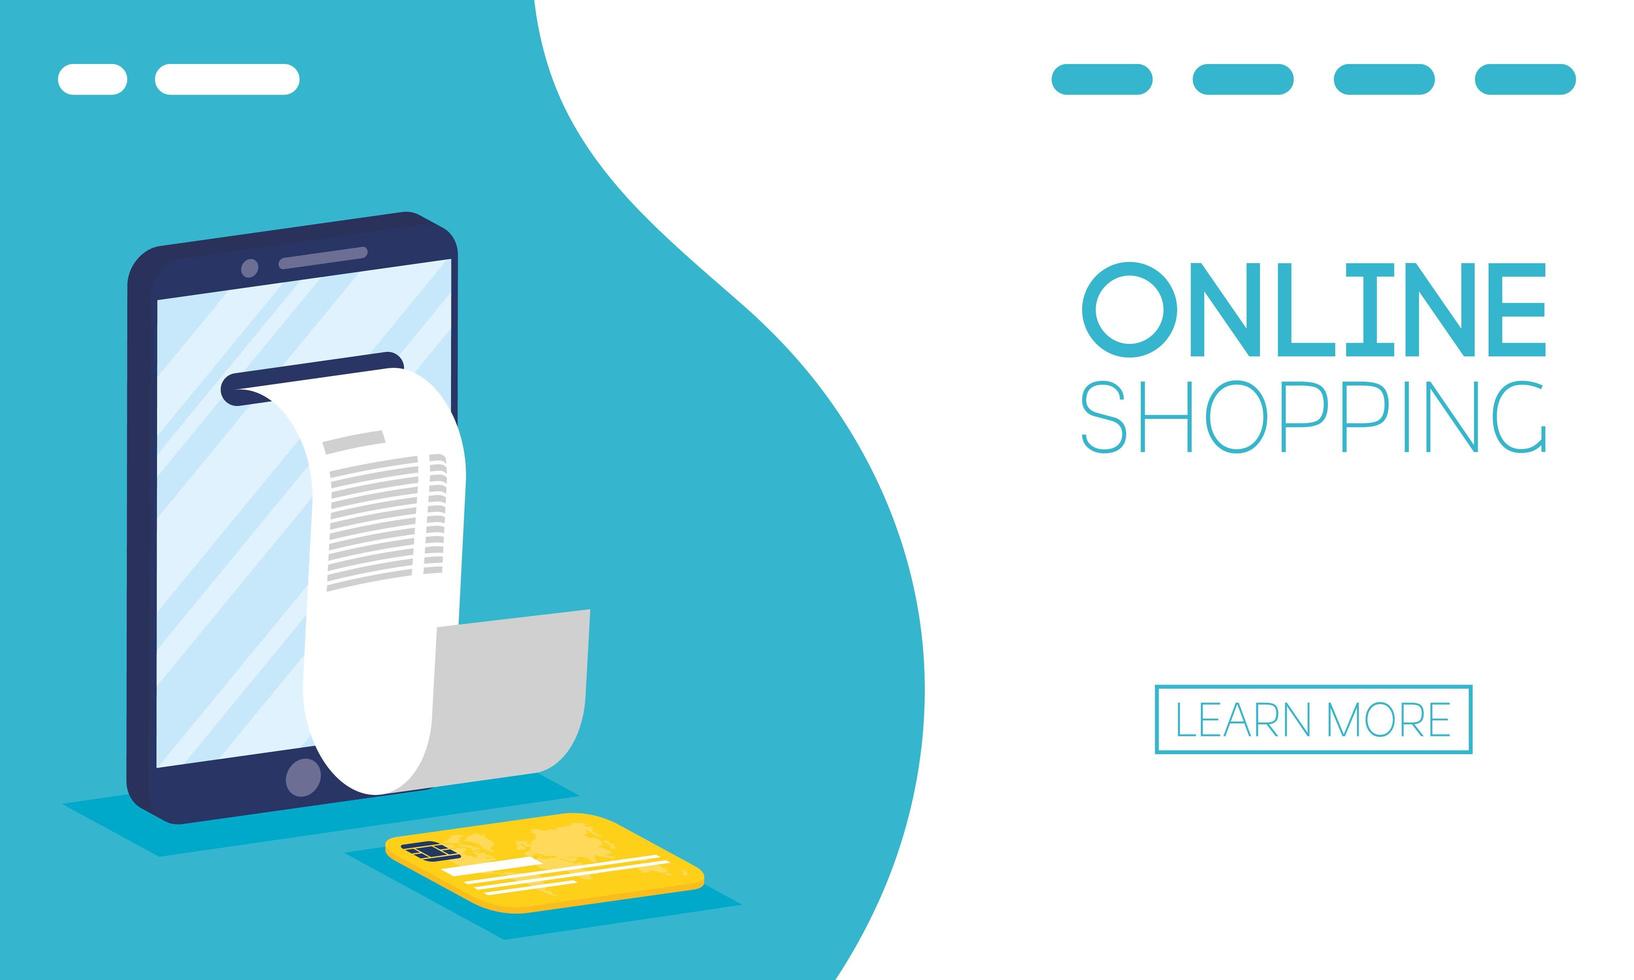 Online shopping and e-commerce banner vector